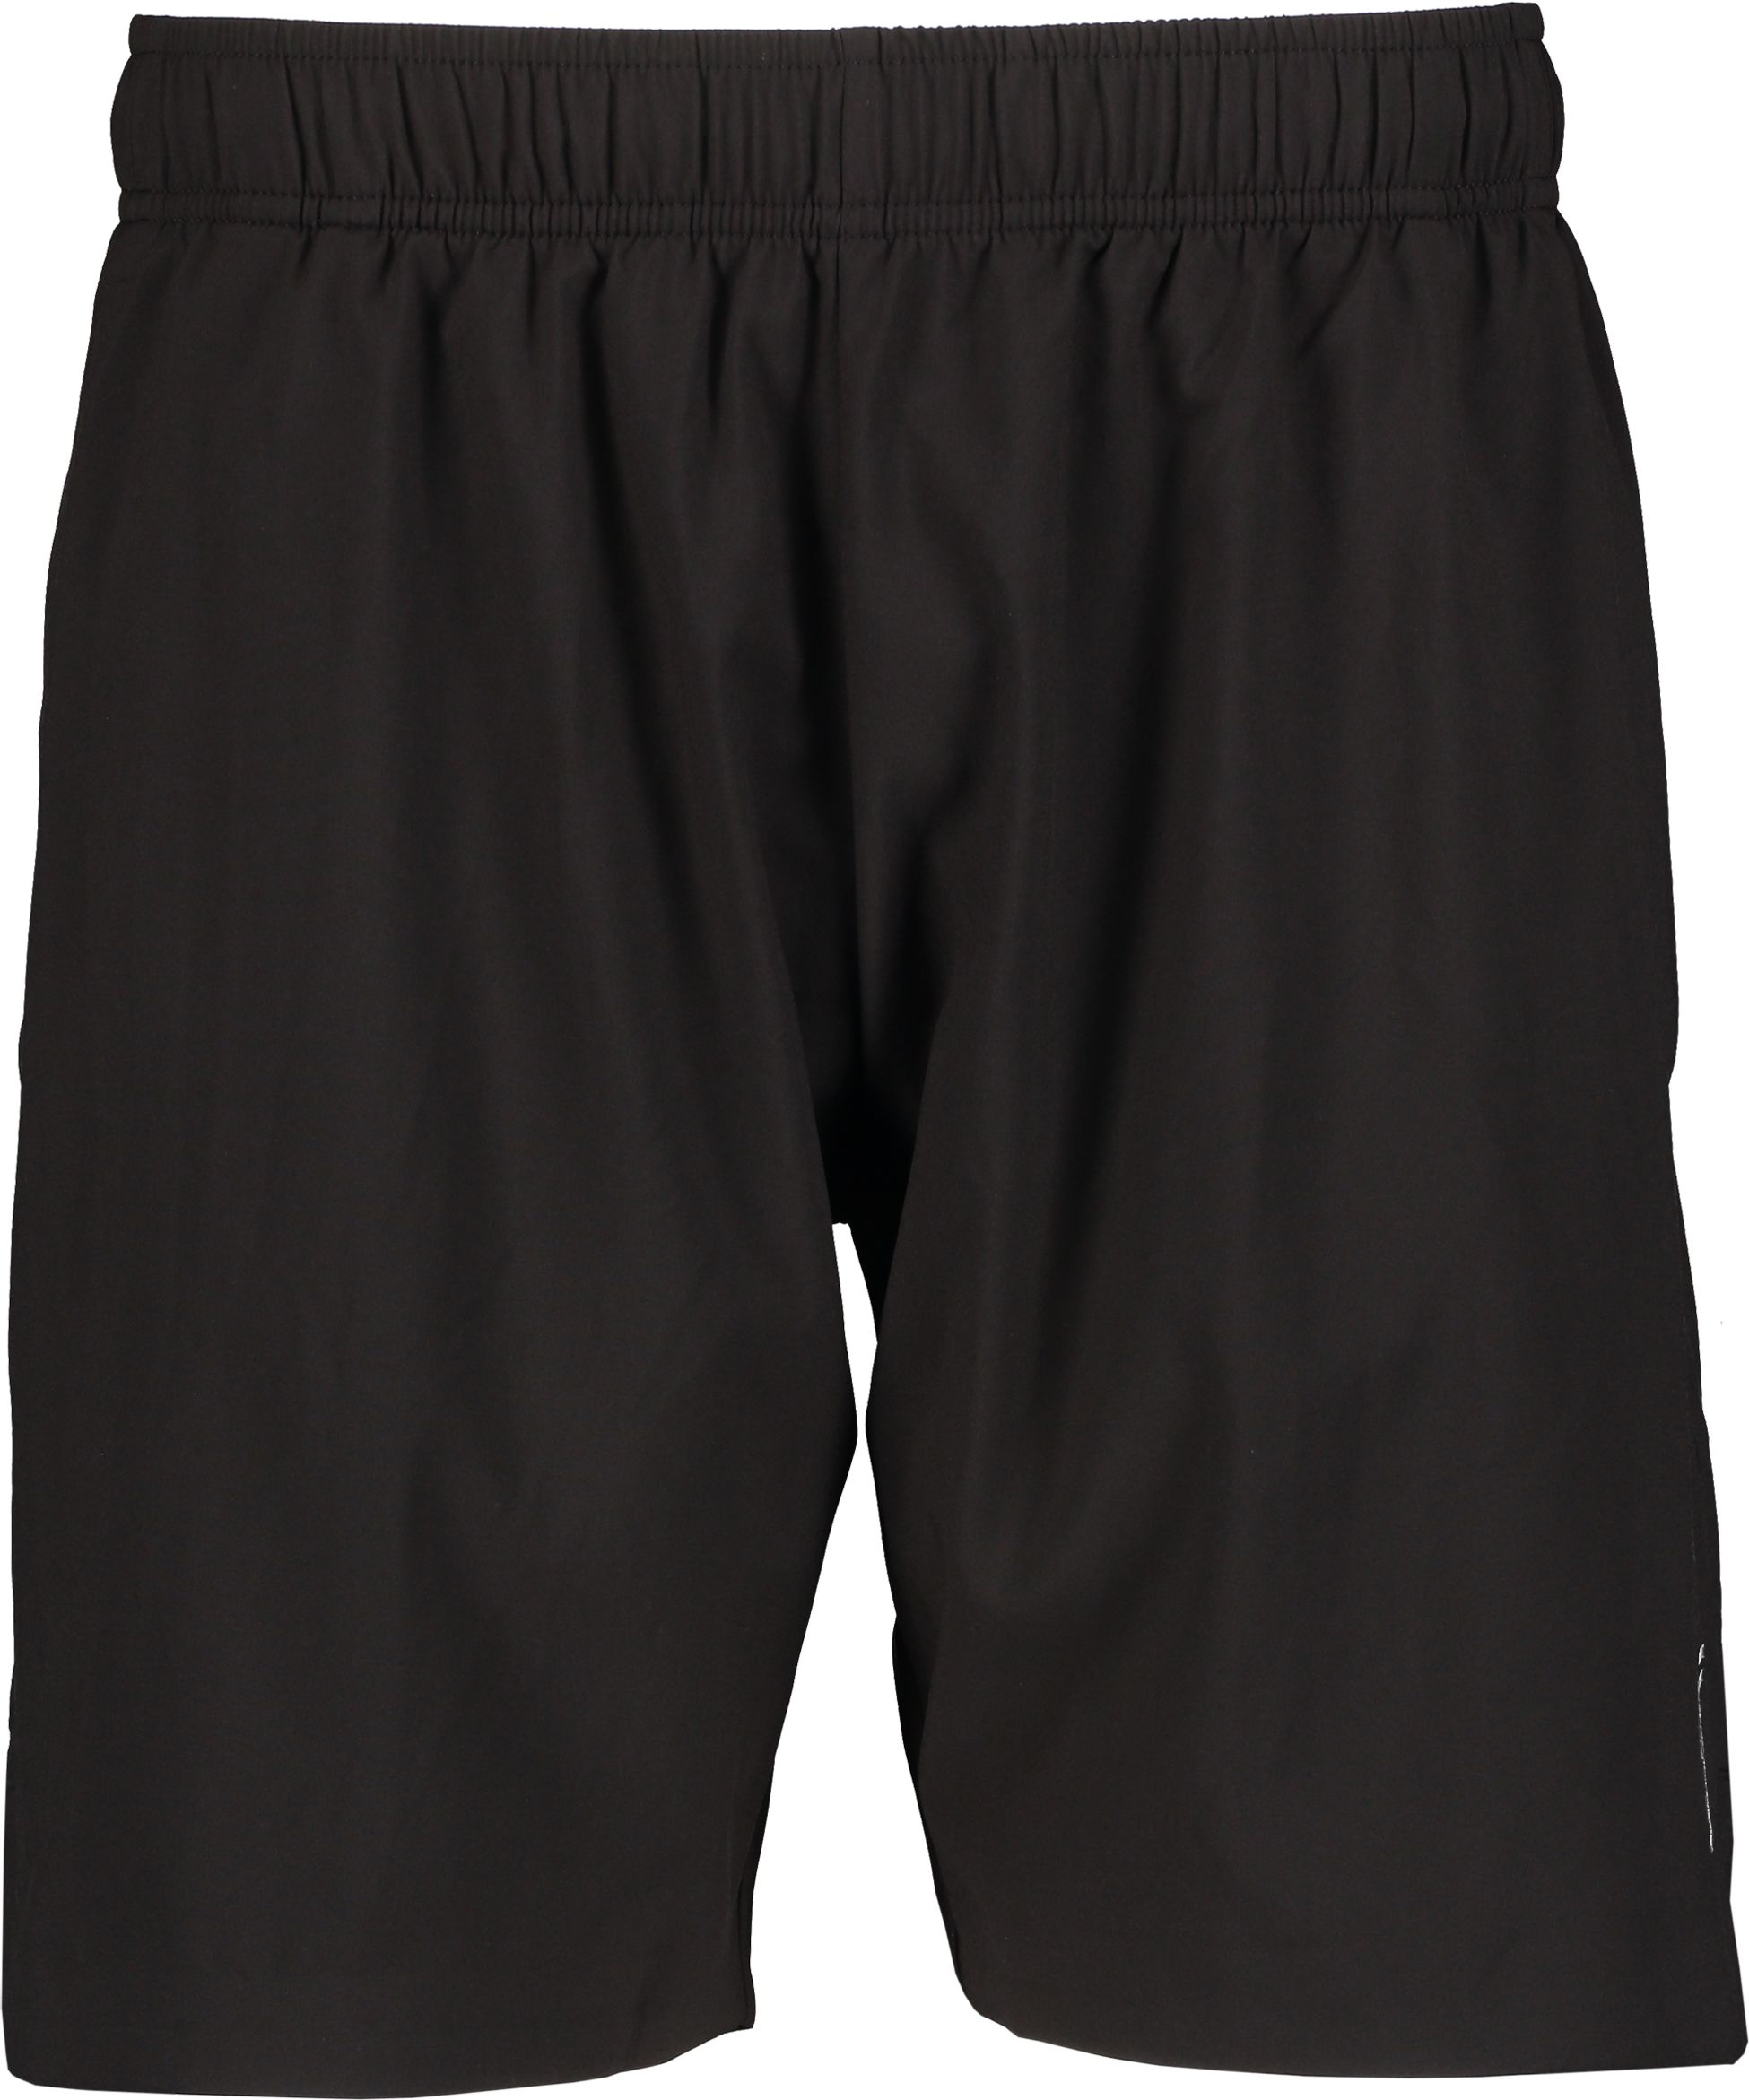 RS, M PERFORMANCE SHORTS